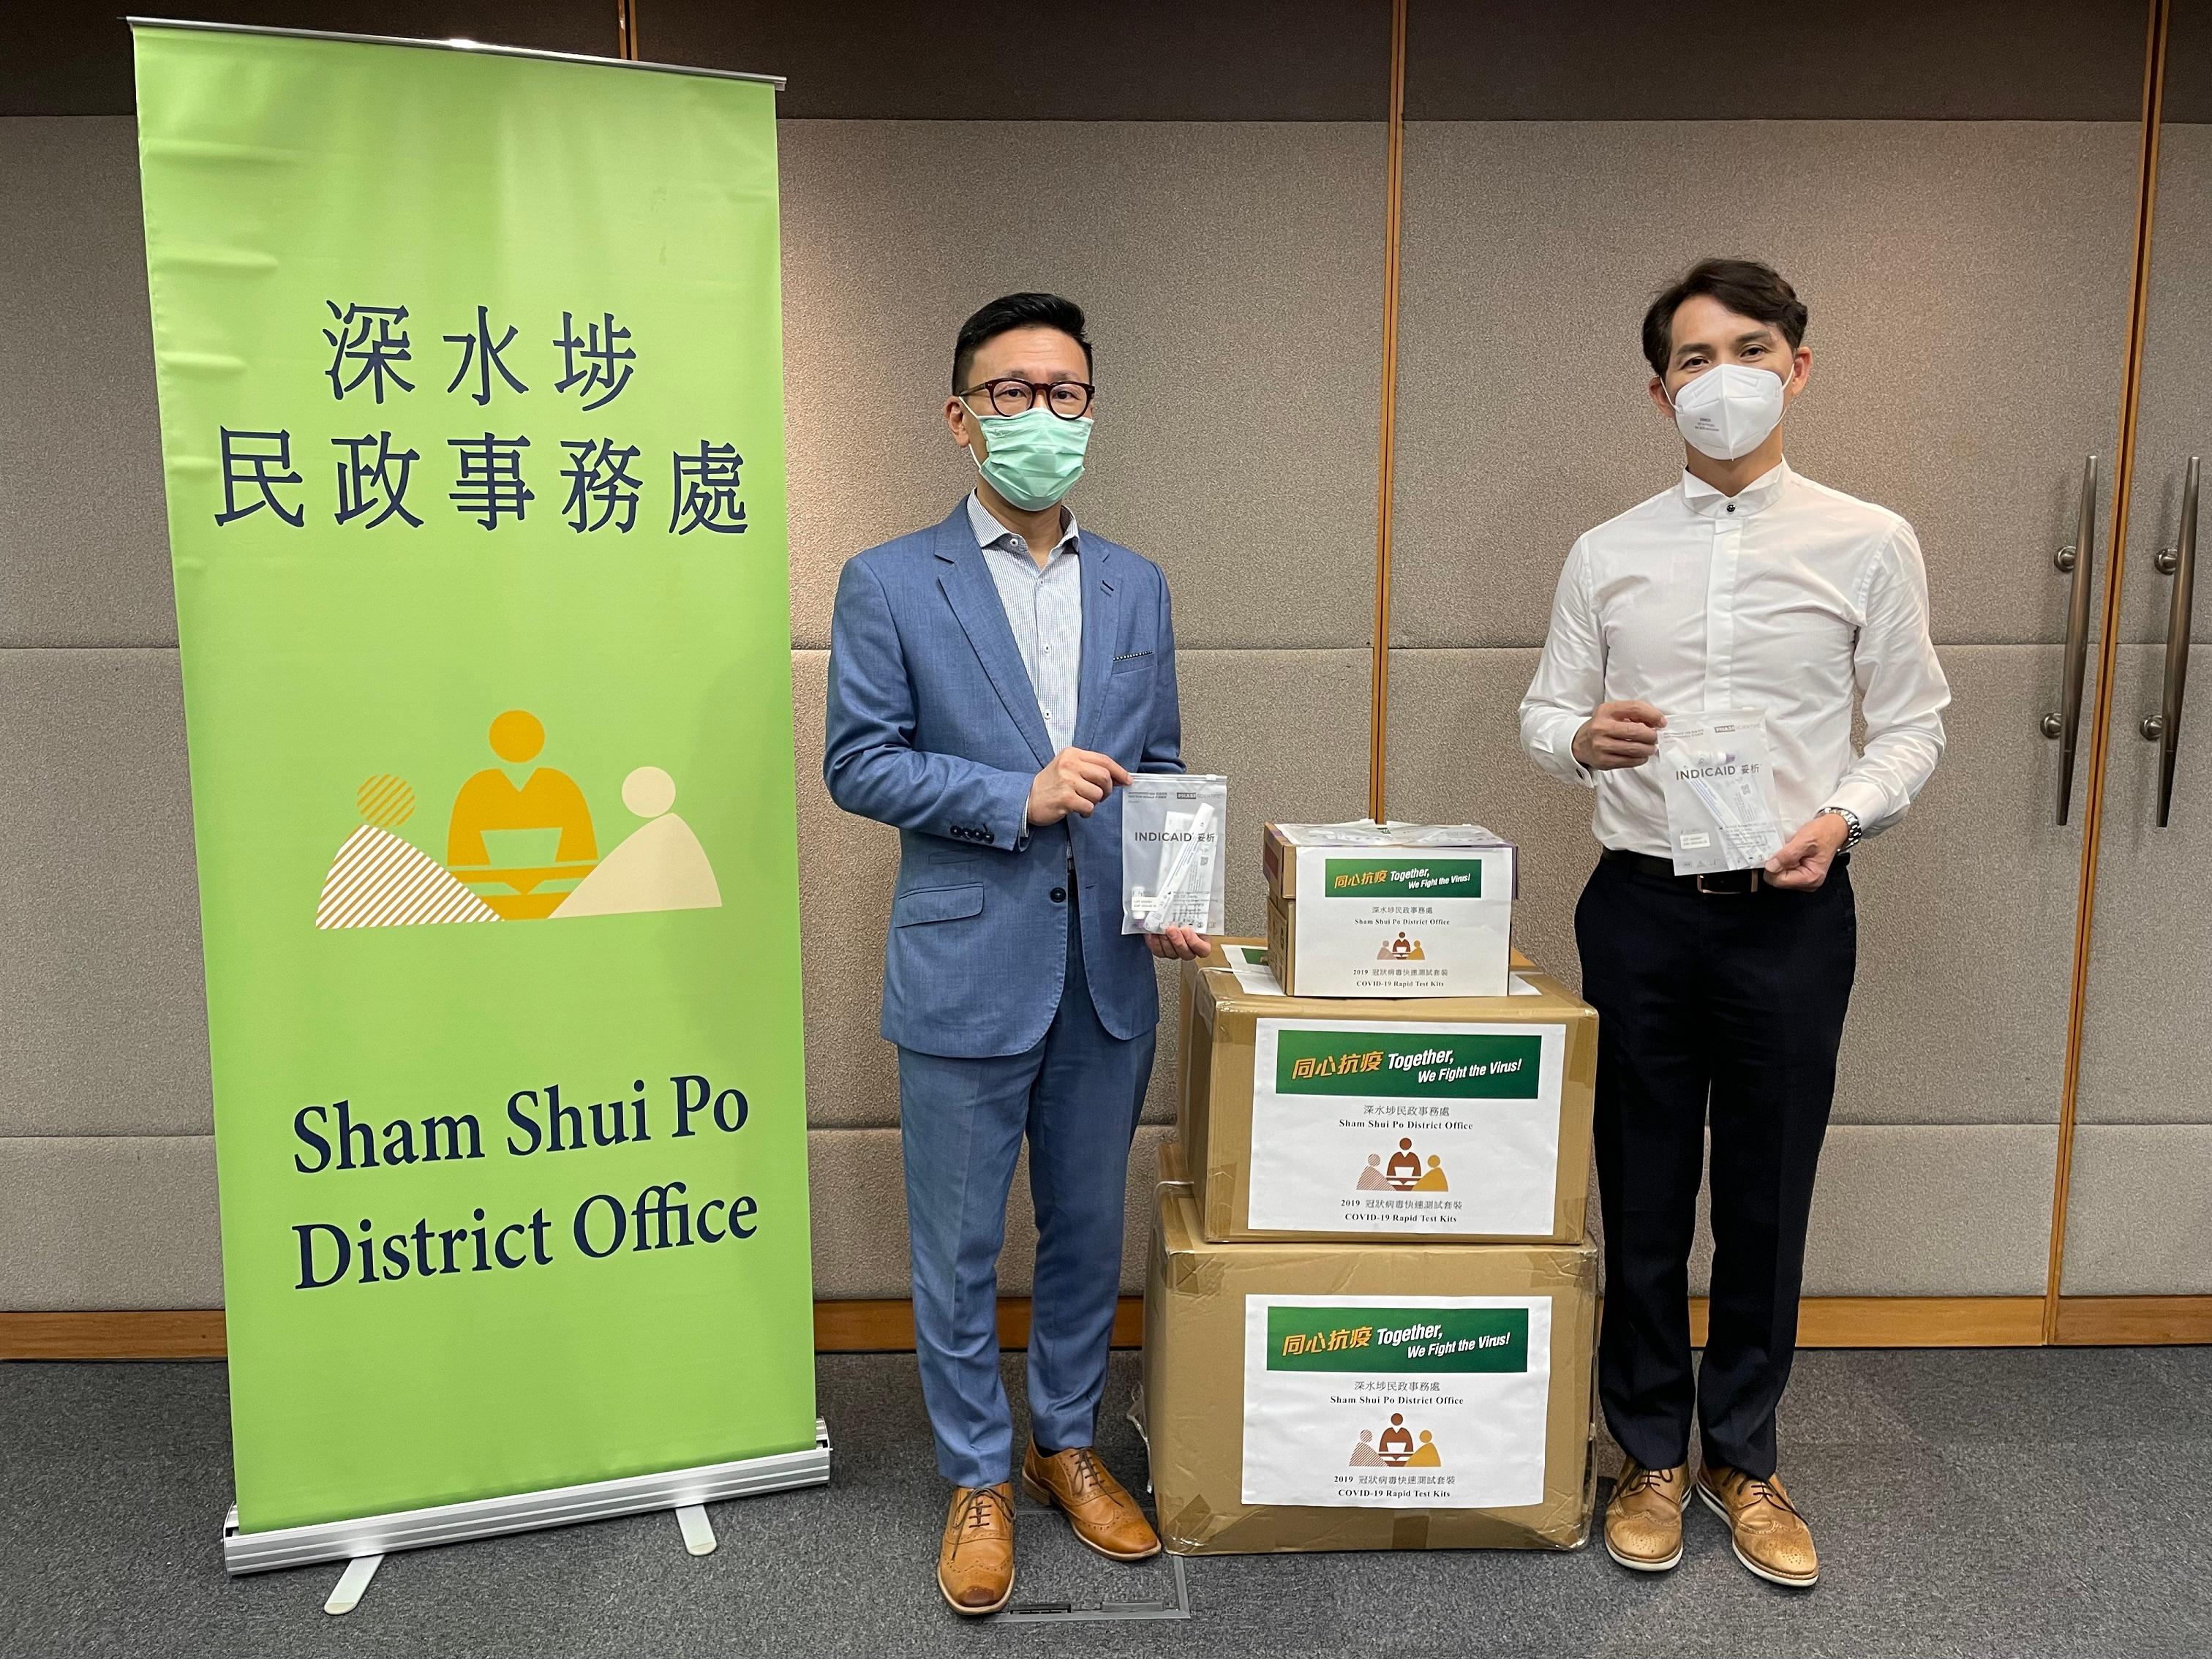 The Sham Shui Po District Office today (June 10) distributed COVID-19 rapid test kits to households, cleansing workers and property management staff living and working in Liberte for voluntary testing through the property management company.